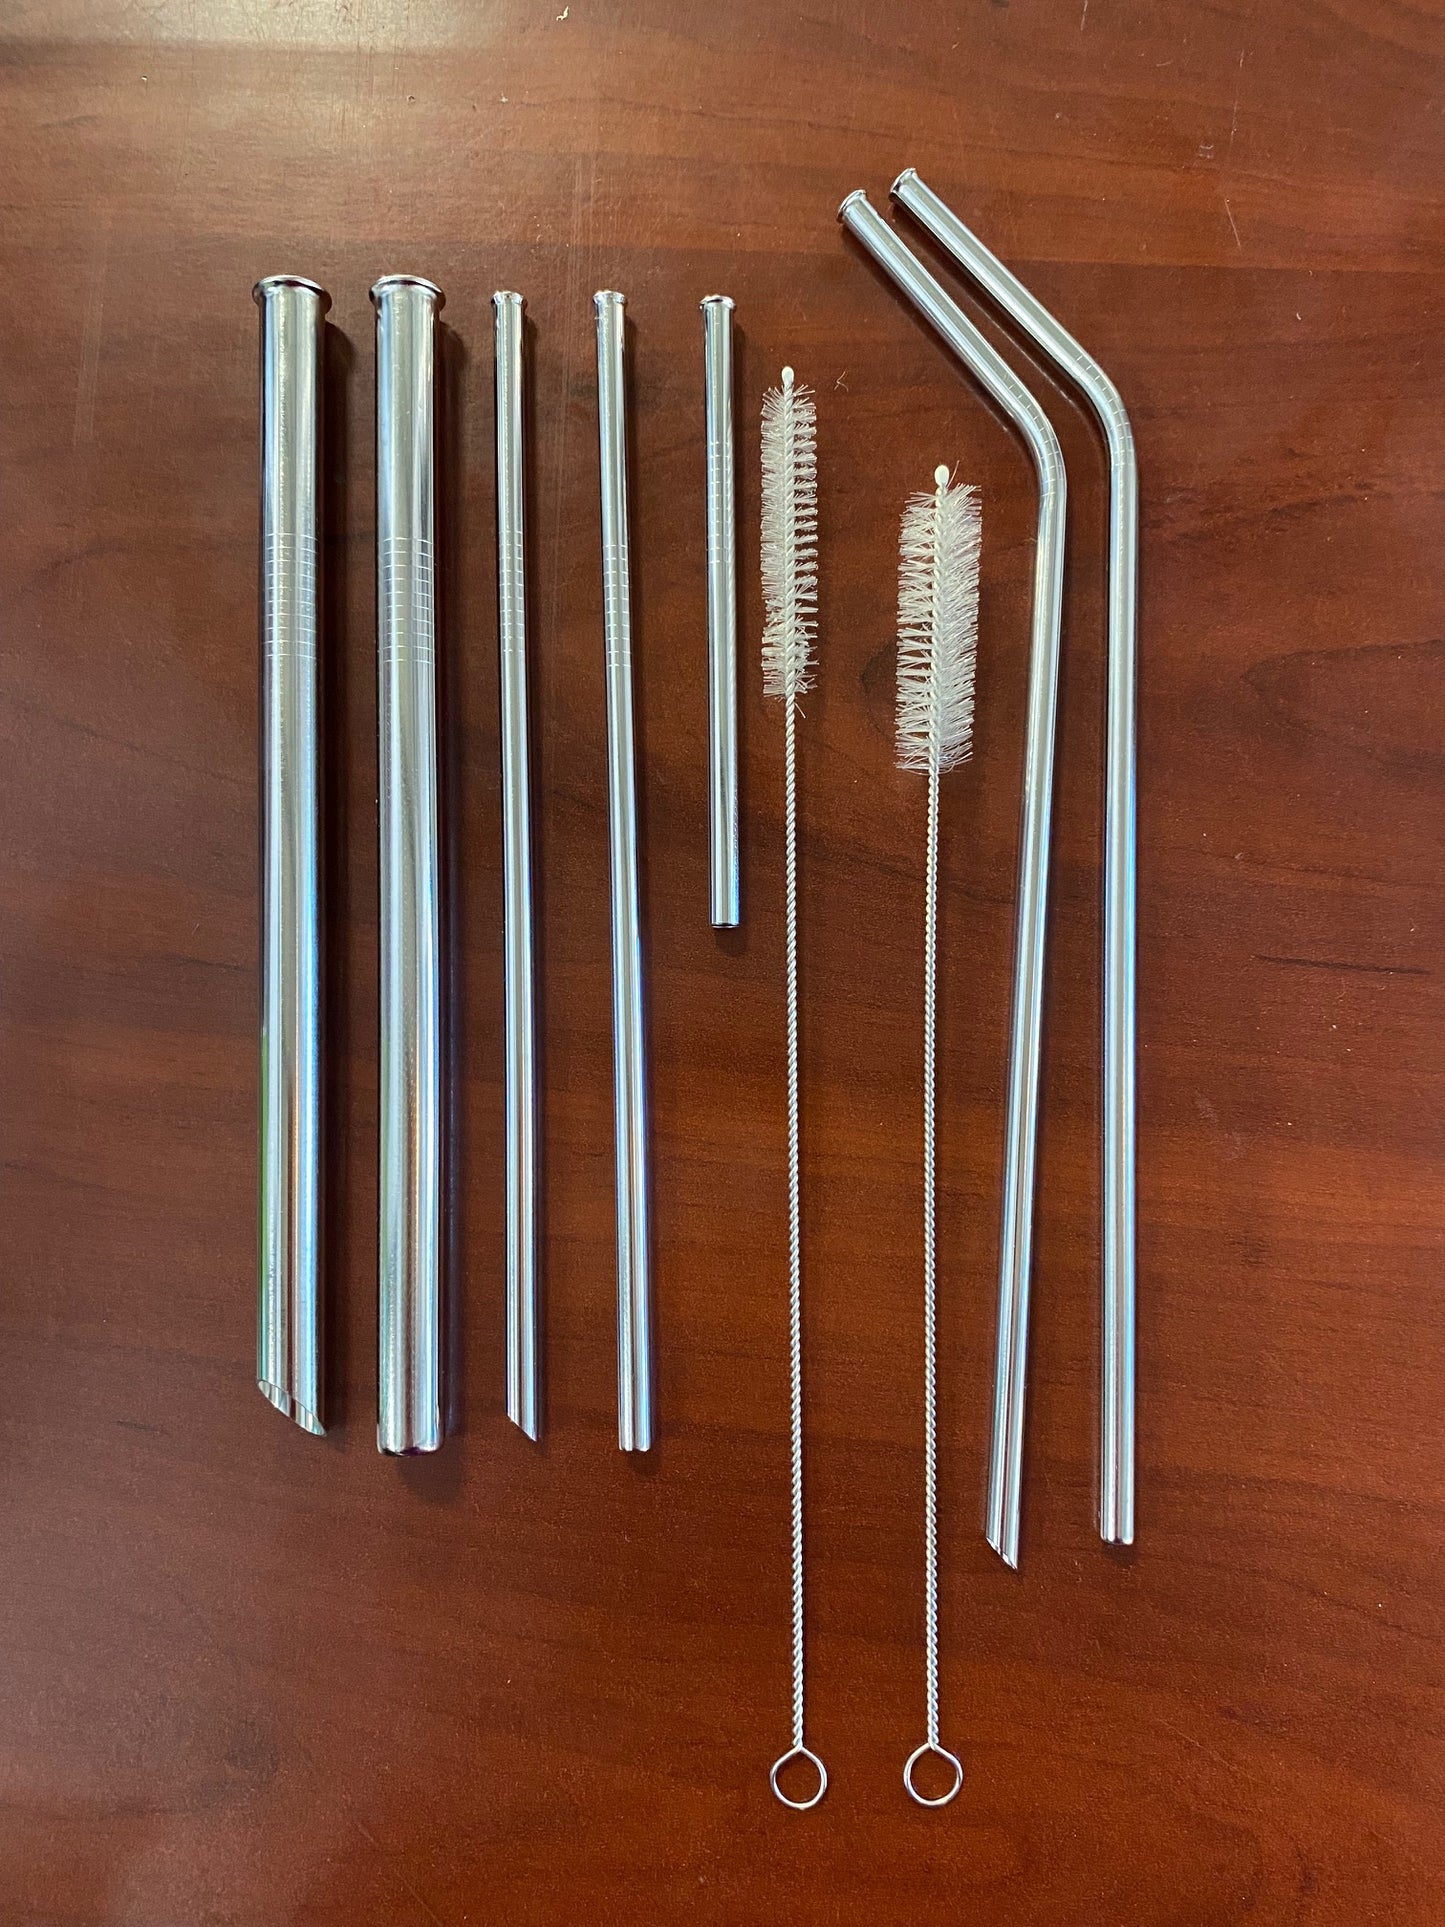 ZFITEI Stainless Steel Straws, Rounded tip Drinking Straws